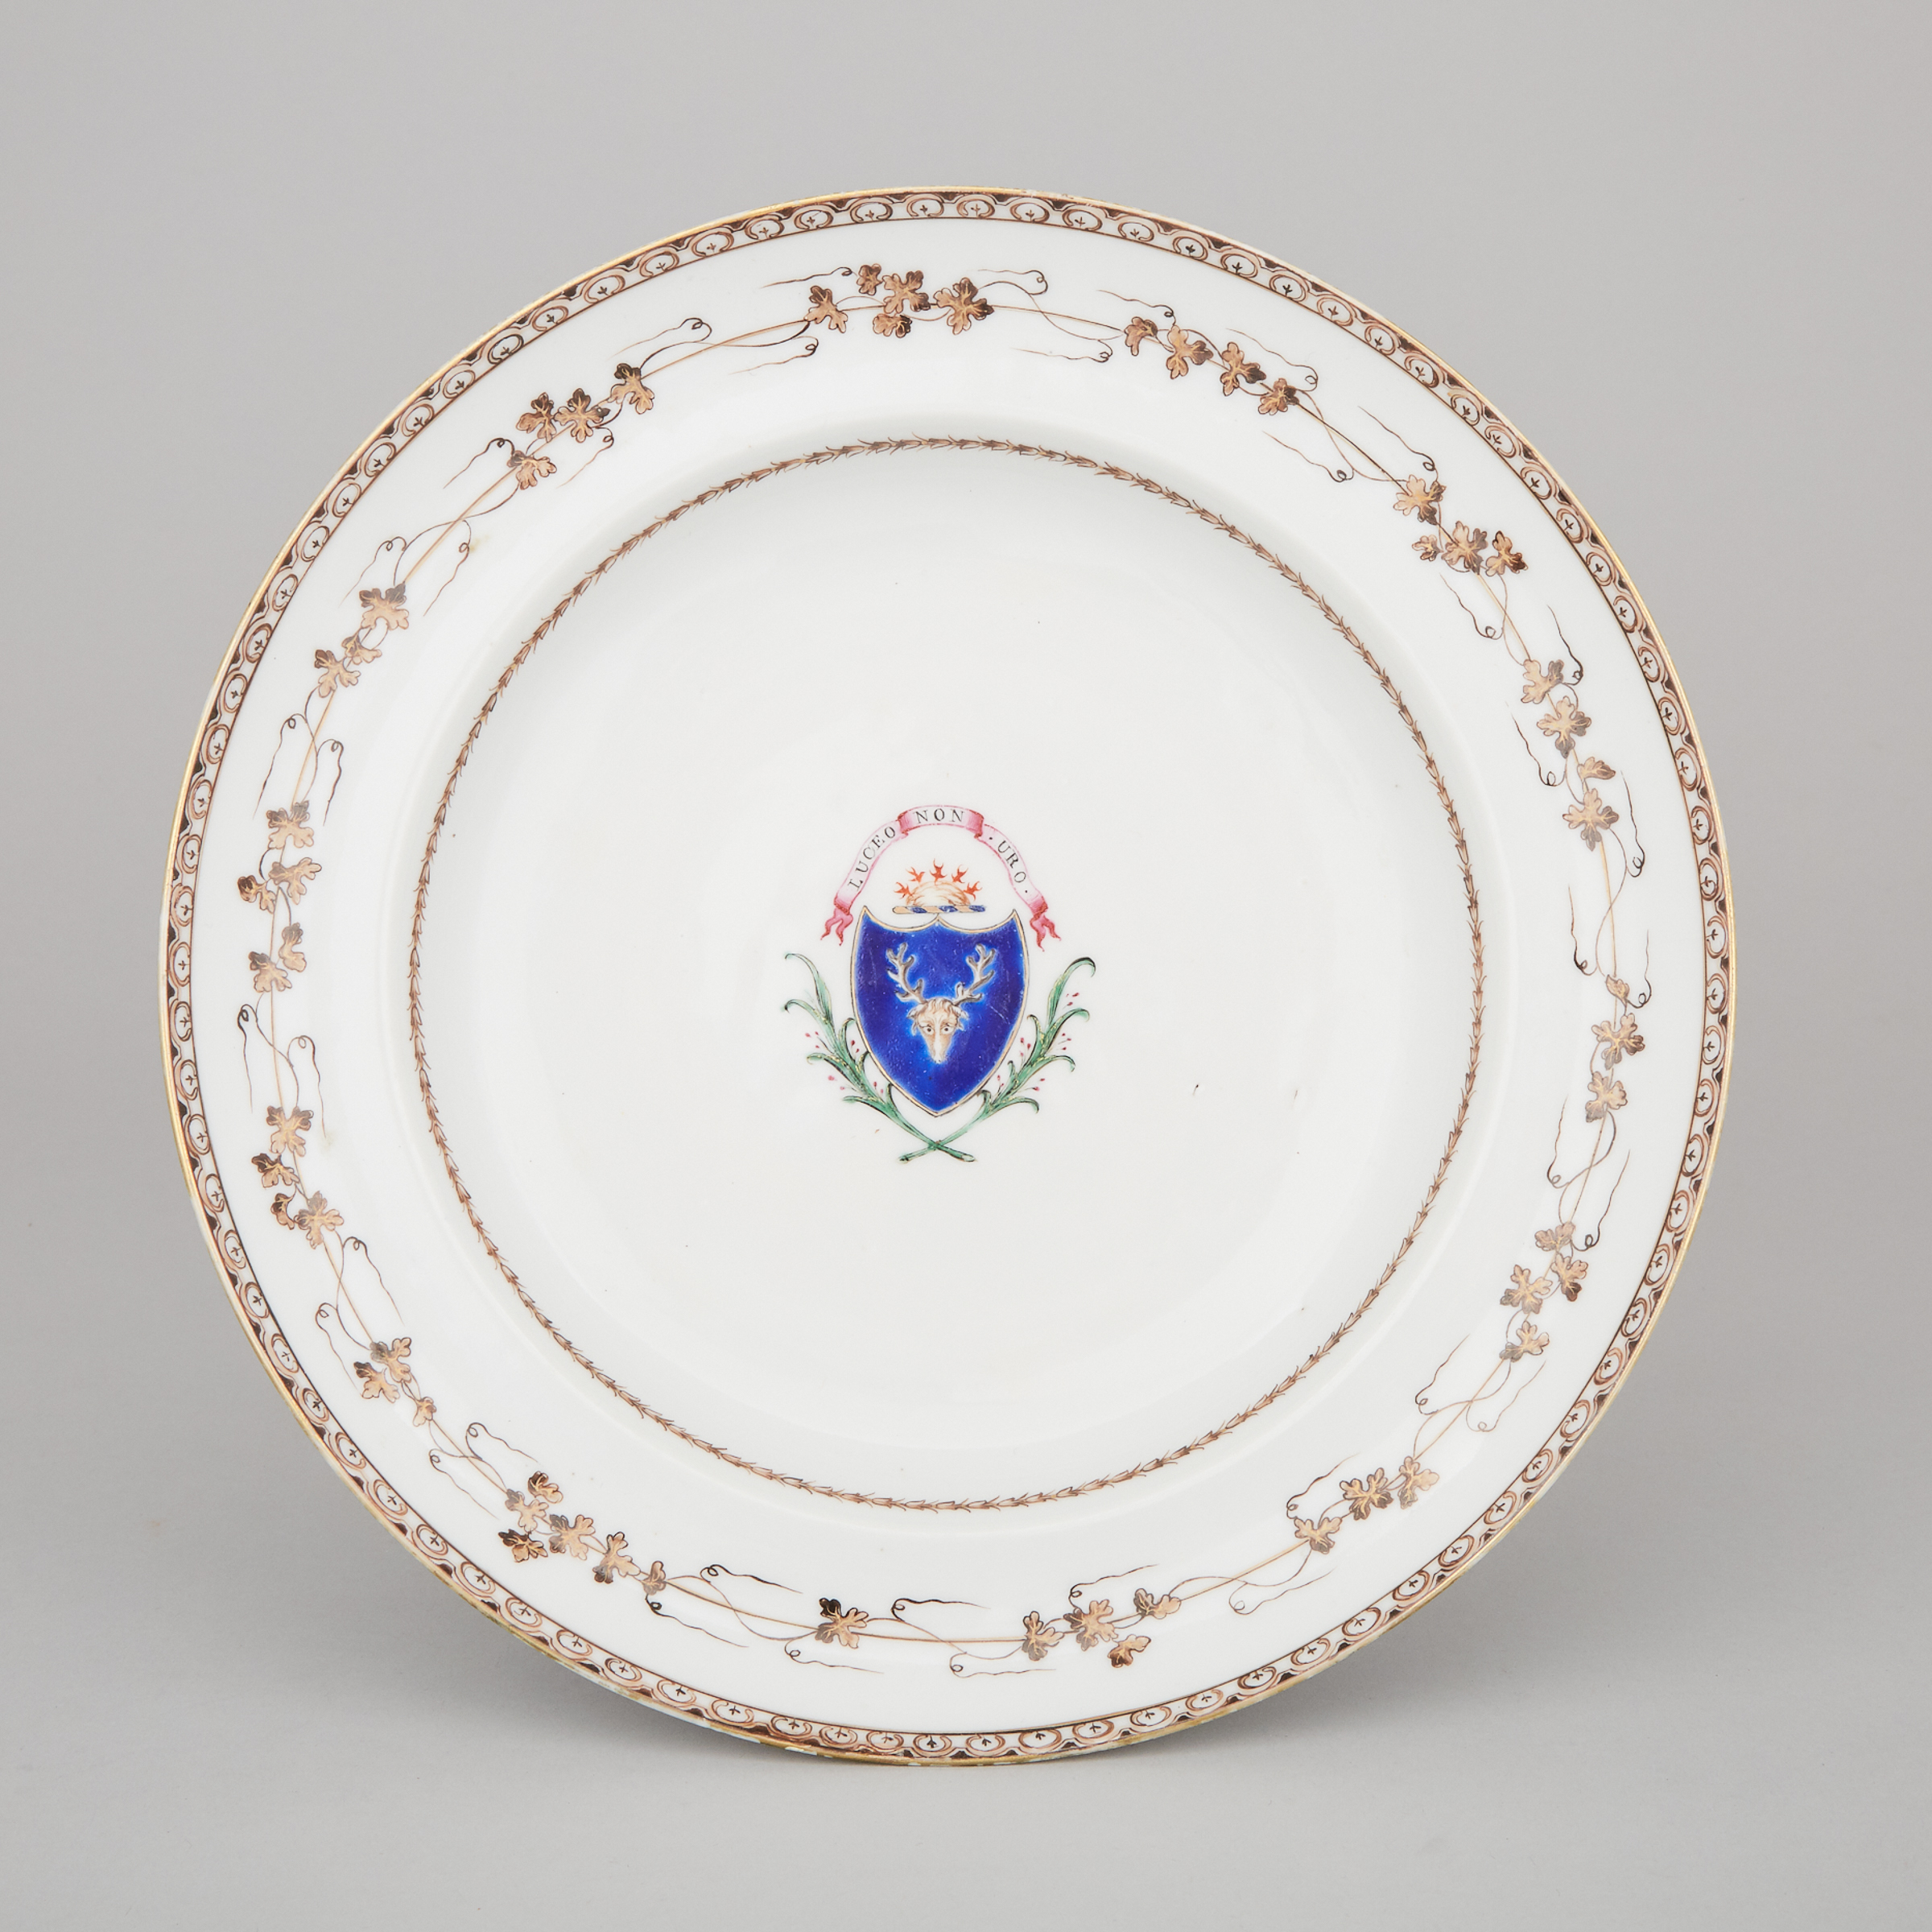 Chinese Export Porcelain Armorial Soup Plate, c.1800